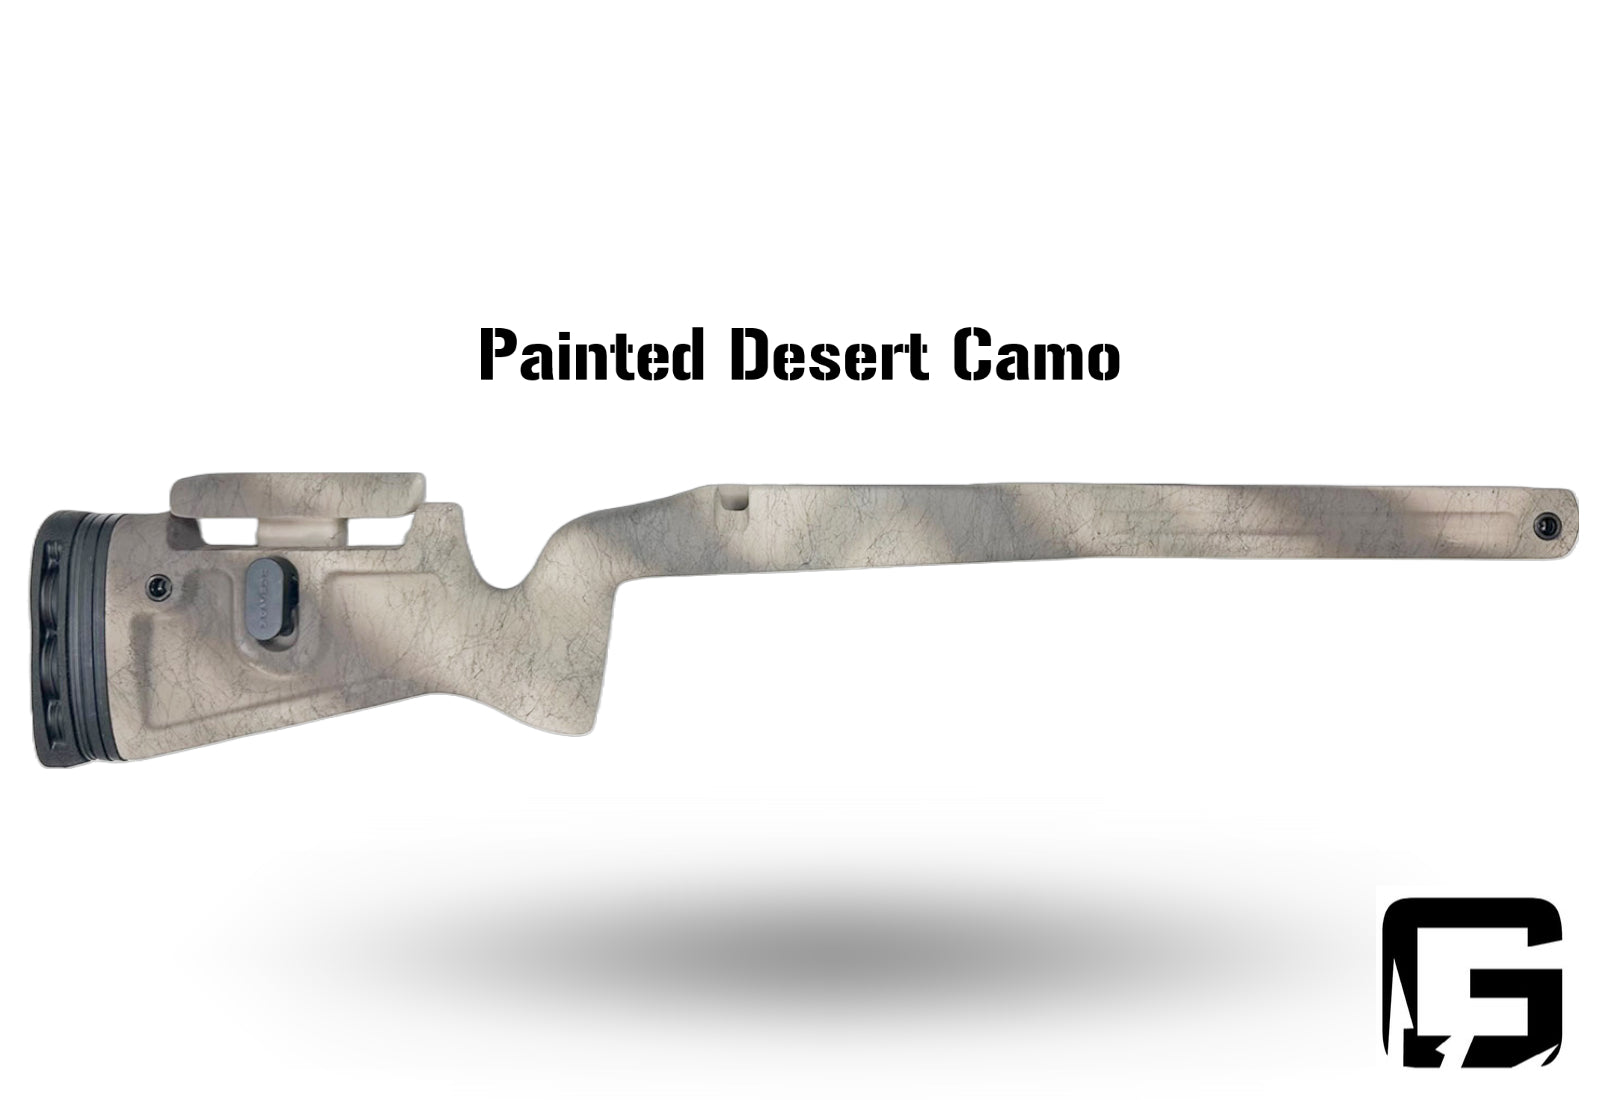 Phoenix 2 - Right Hand Rem 700 or 700 clone Short Action, M5, Fits any barrel.  Painted Desert Camo.